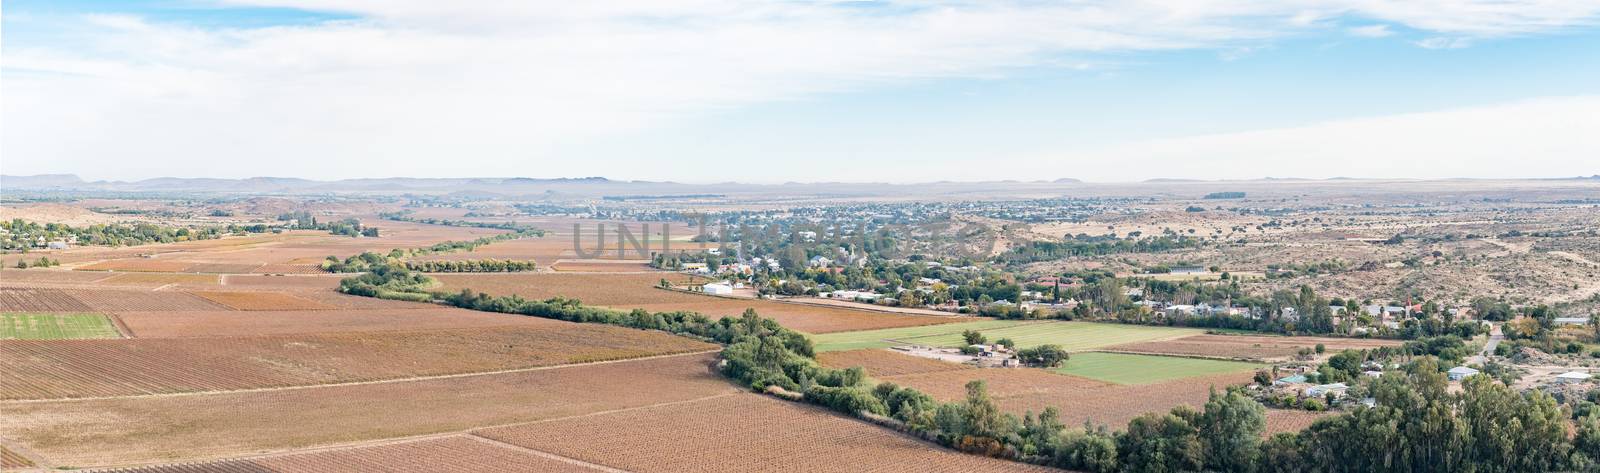 A panoramic view of Keimoes and vineyards as seen from the viewpoint on Tierberg (Tiger Mountain)